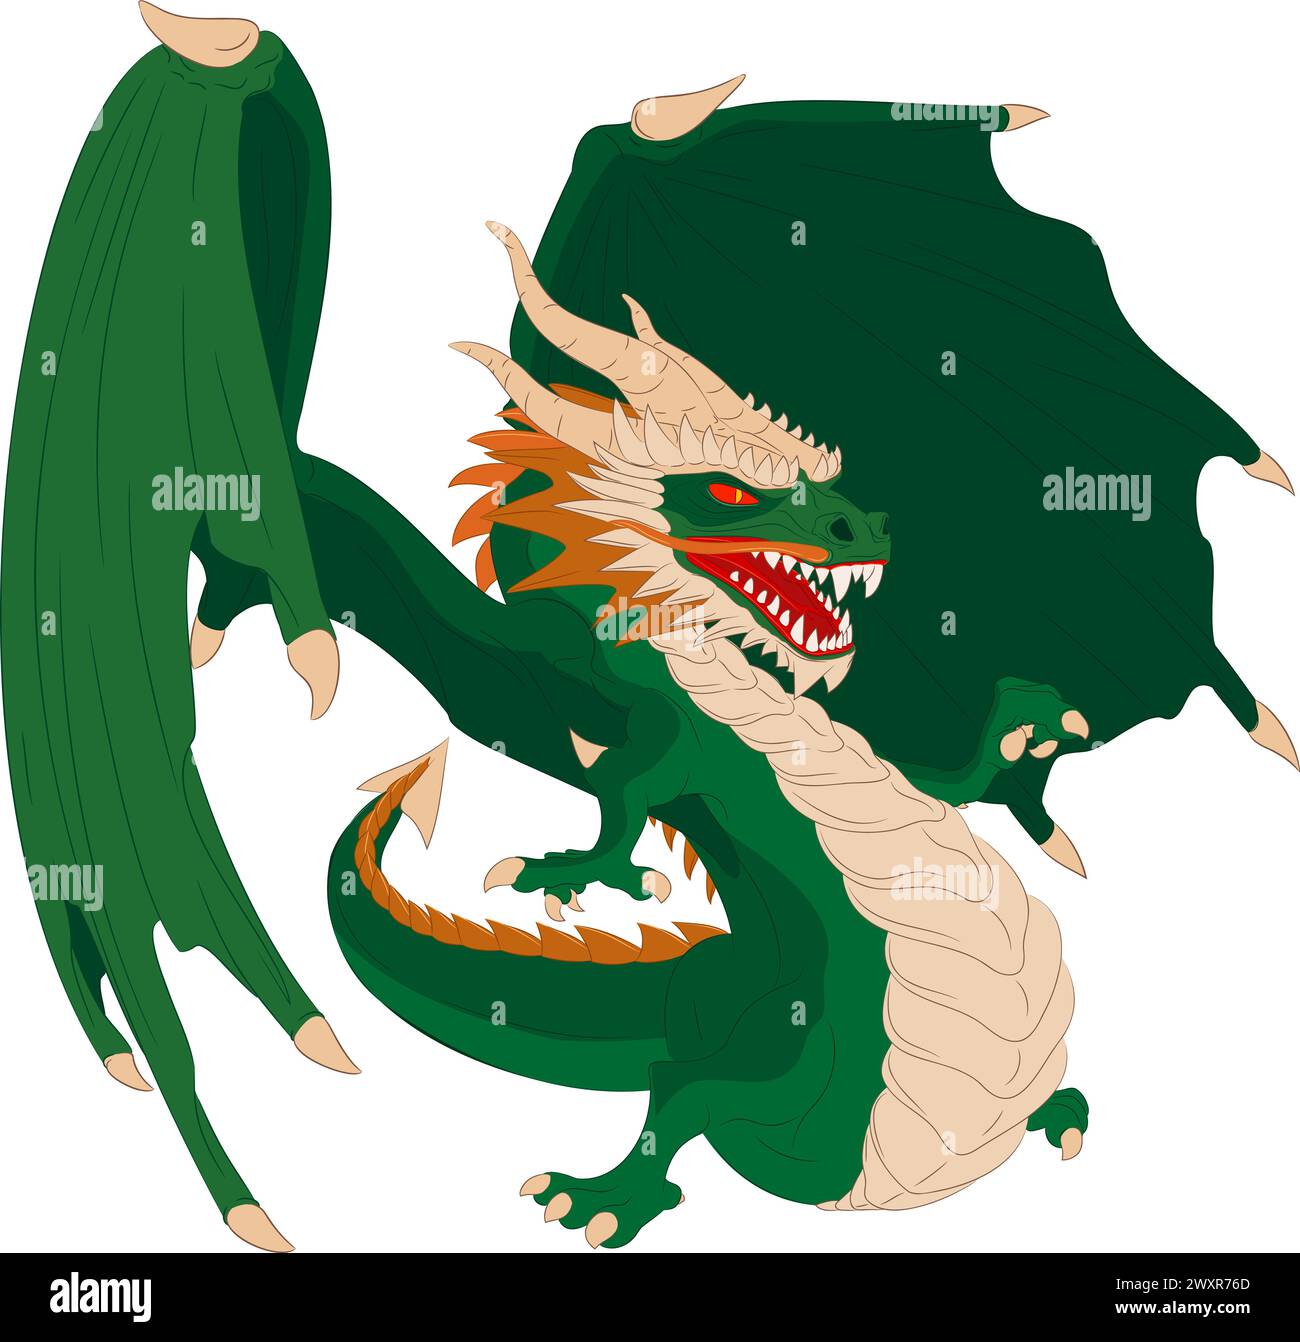 Green wooden dragon with wings. Vector illustration of green winged dragon pointing with its right paw finger. Stock Vector